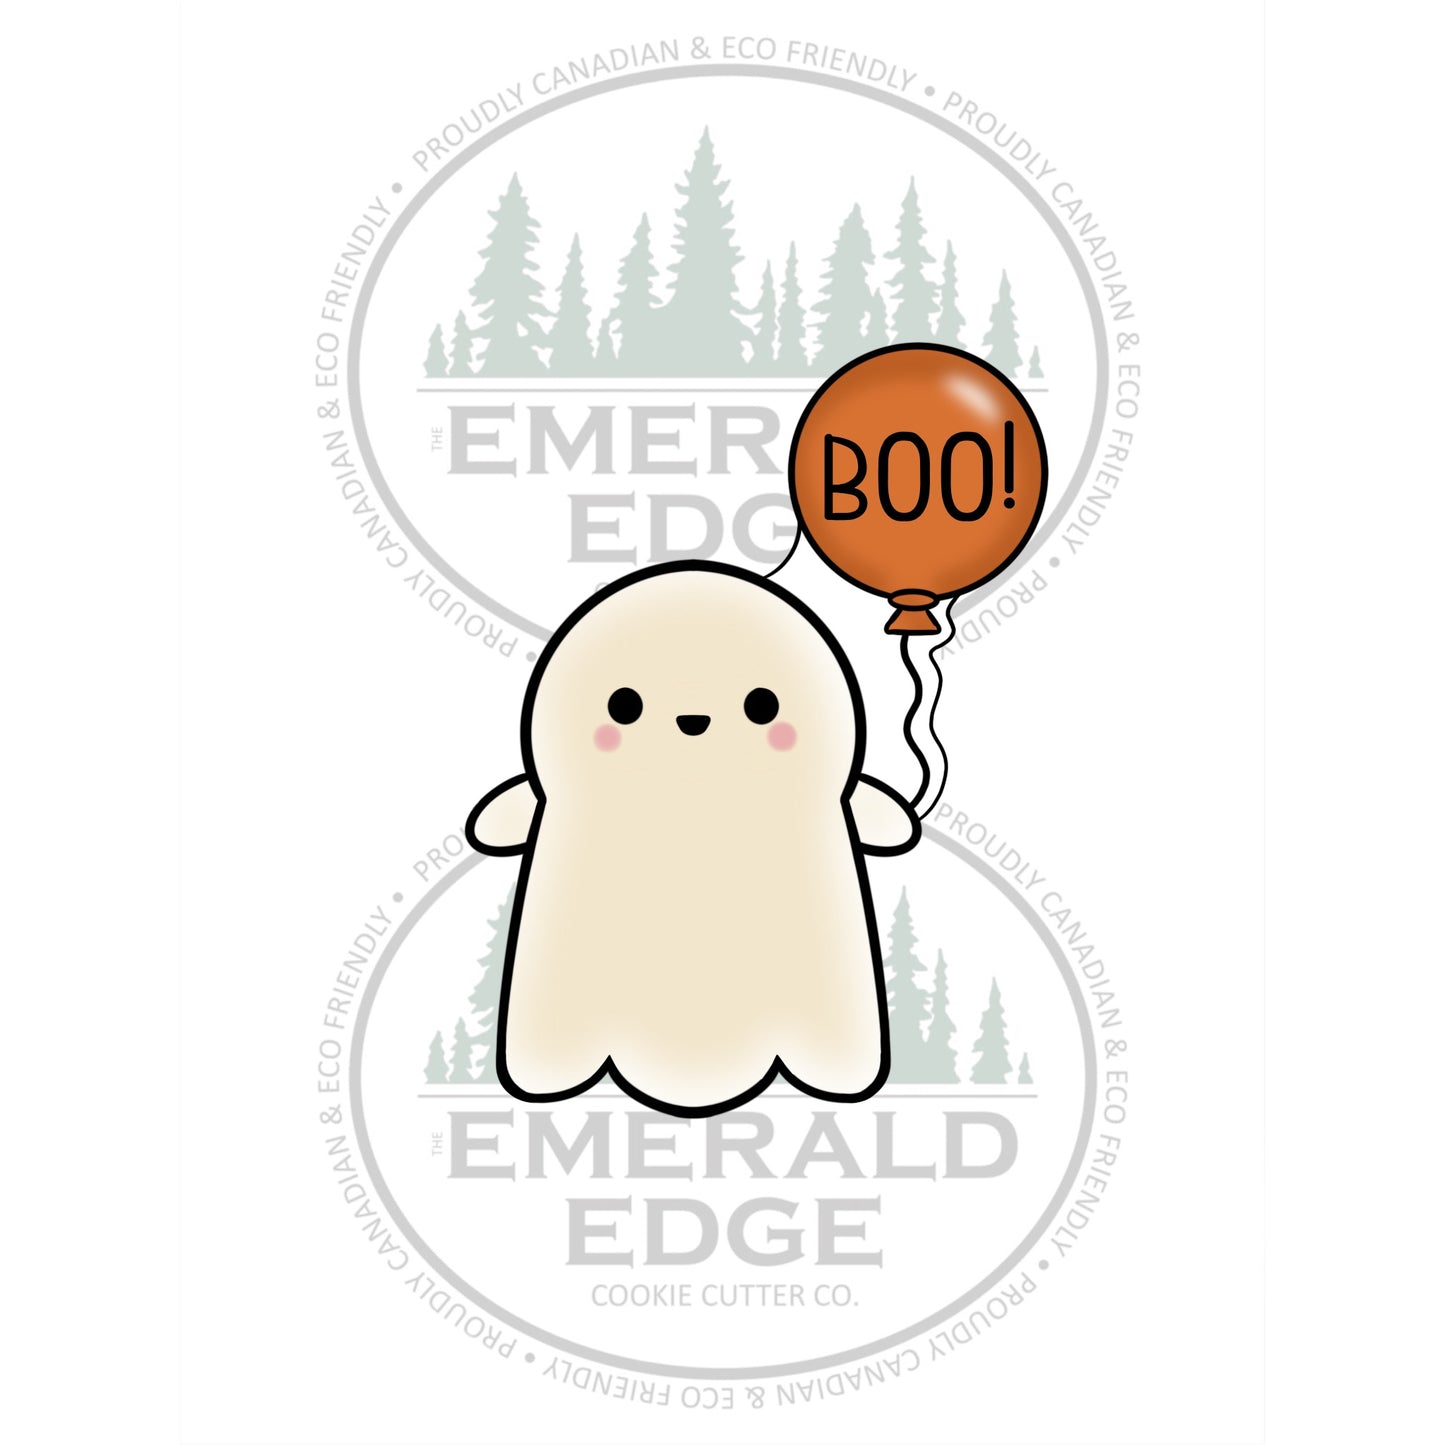 Ghost with Balloon